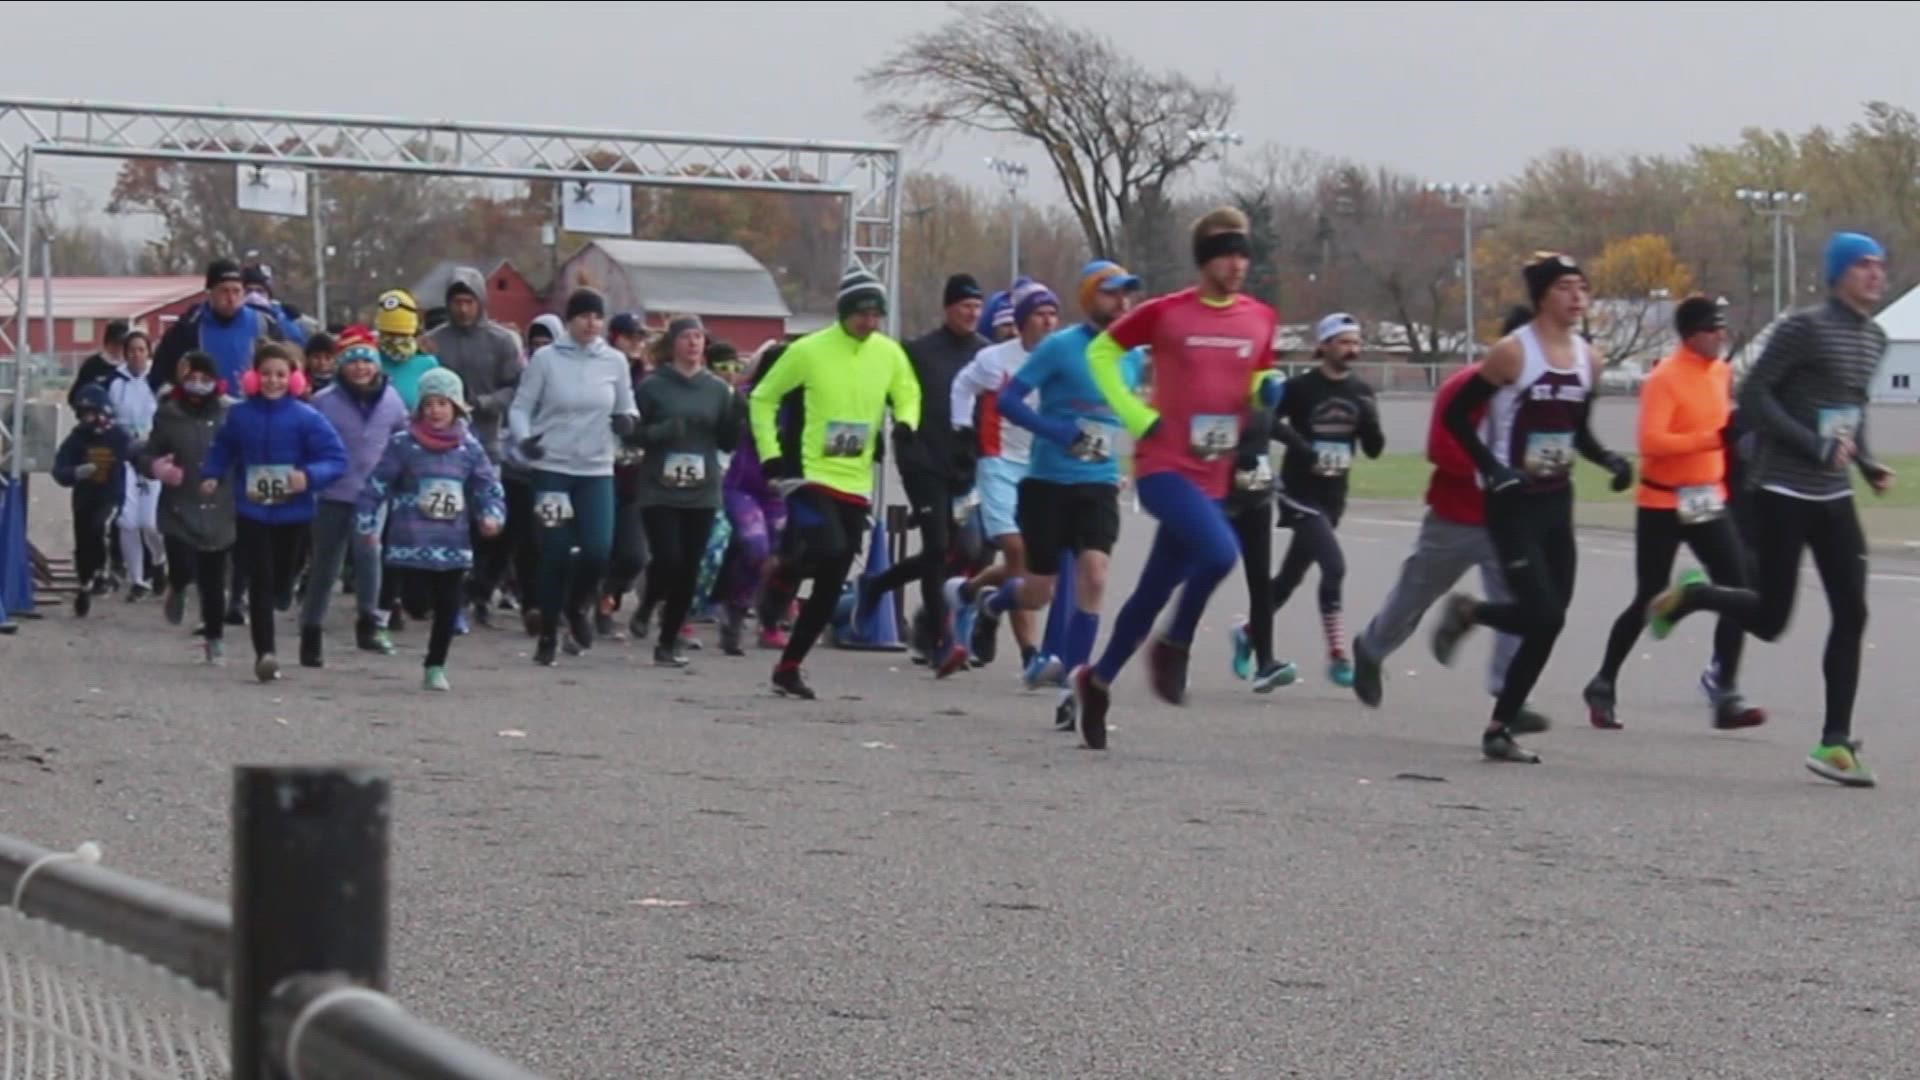 The annual event raises money and awareness for the American Lung Association. This year's race is Saturday, November 12 at 11 a.m. at the Erie County Fairgrounds.